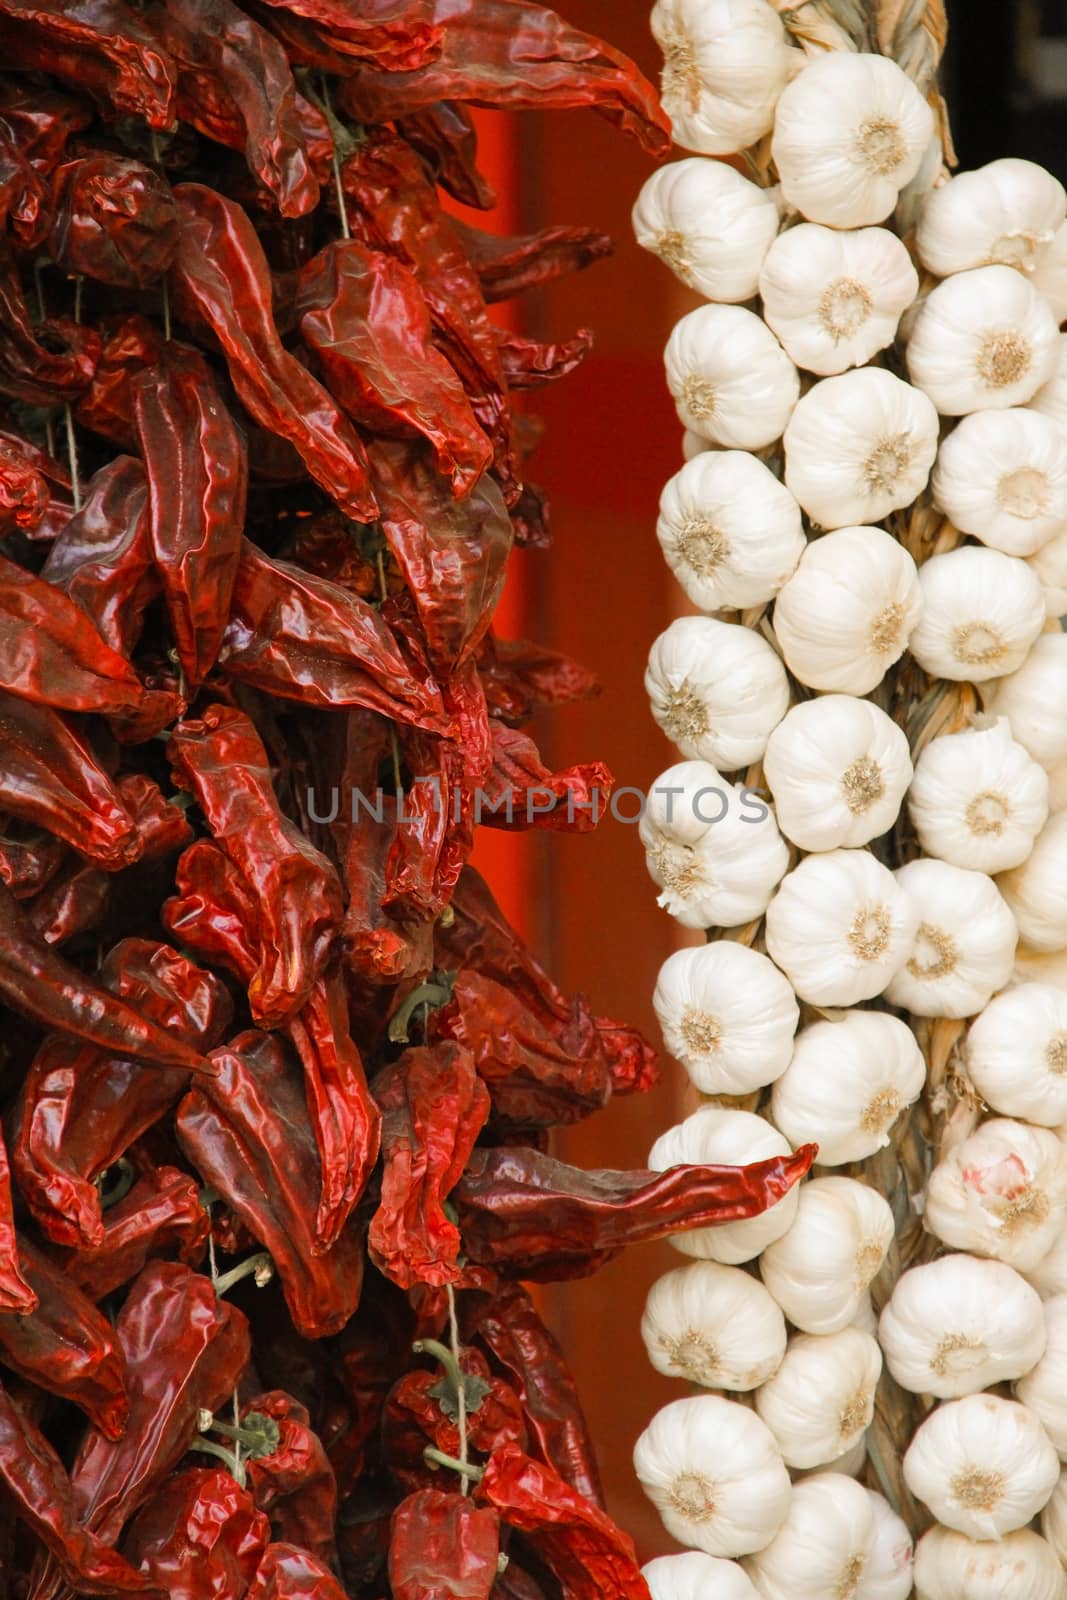 Red peppers and garlic in market by destillat